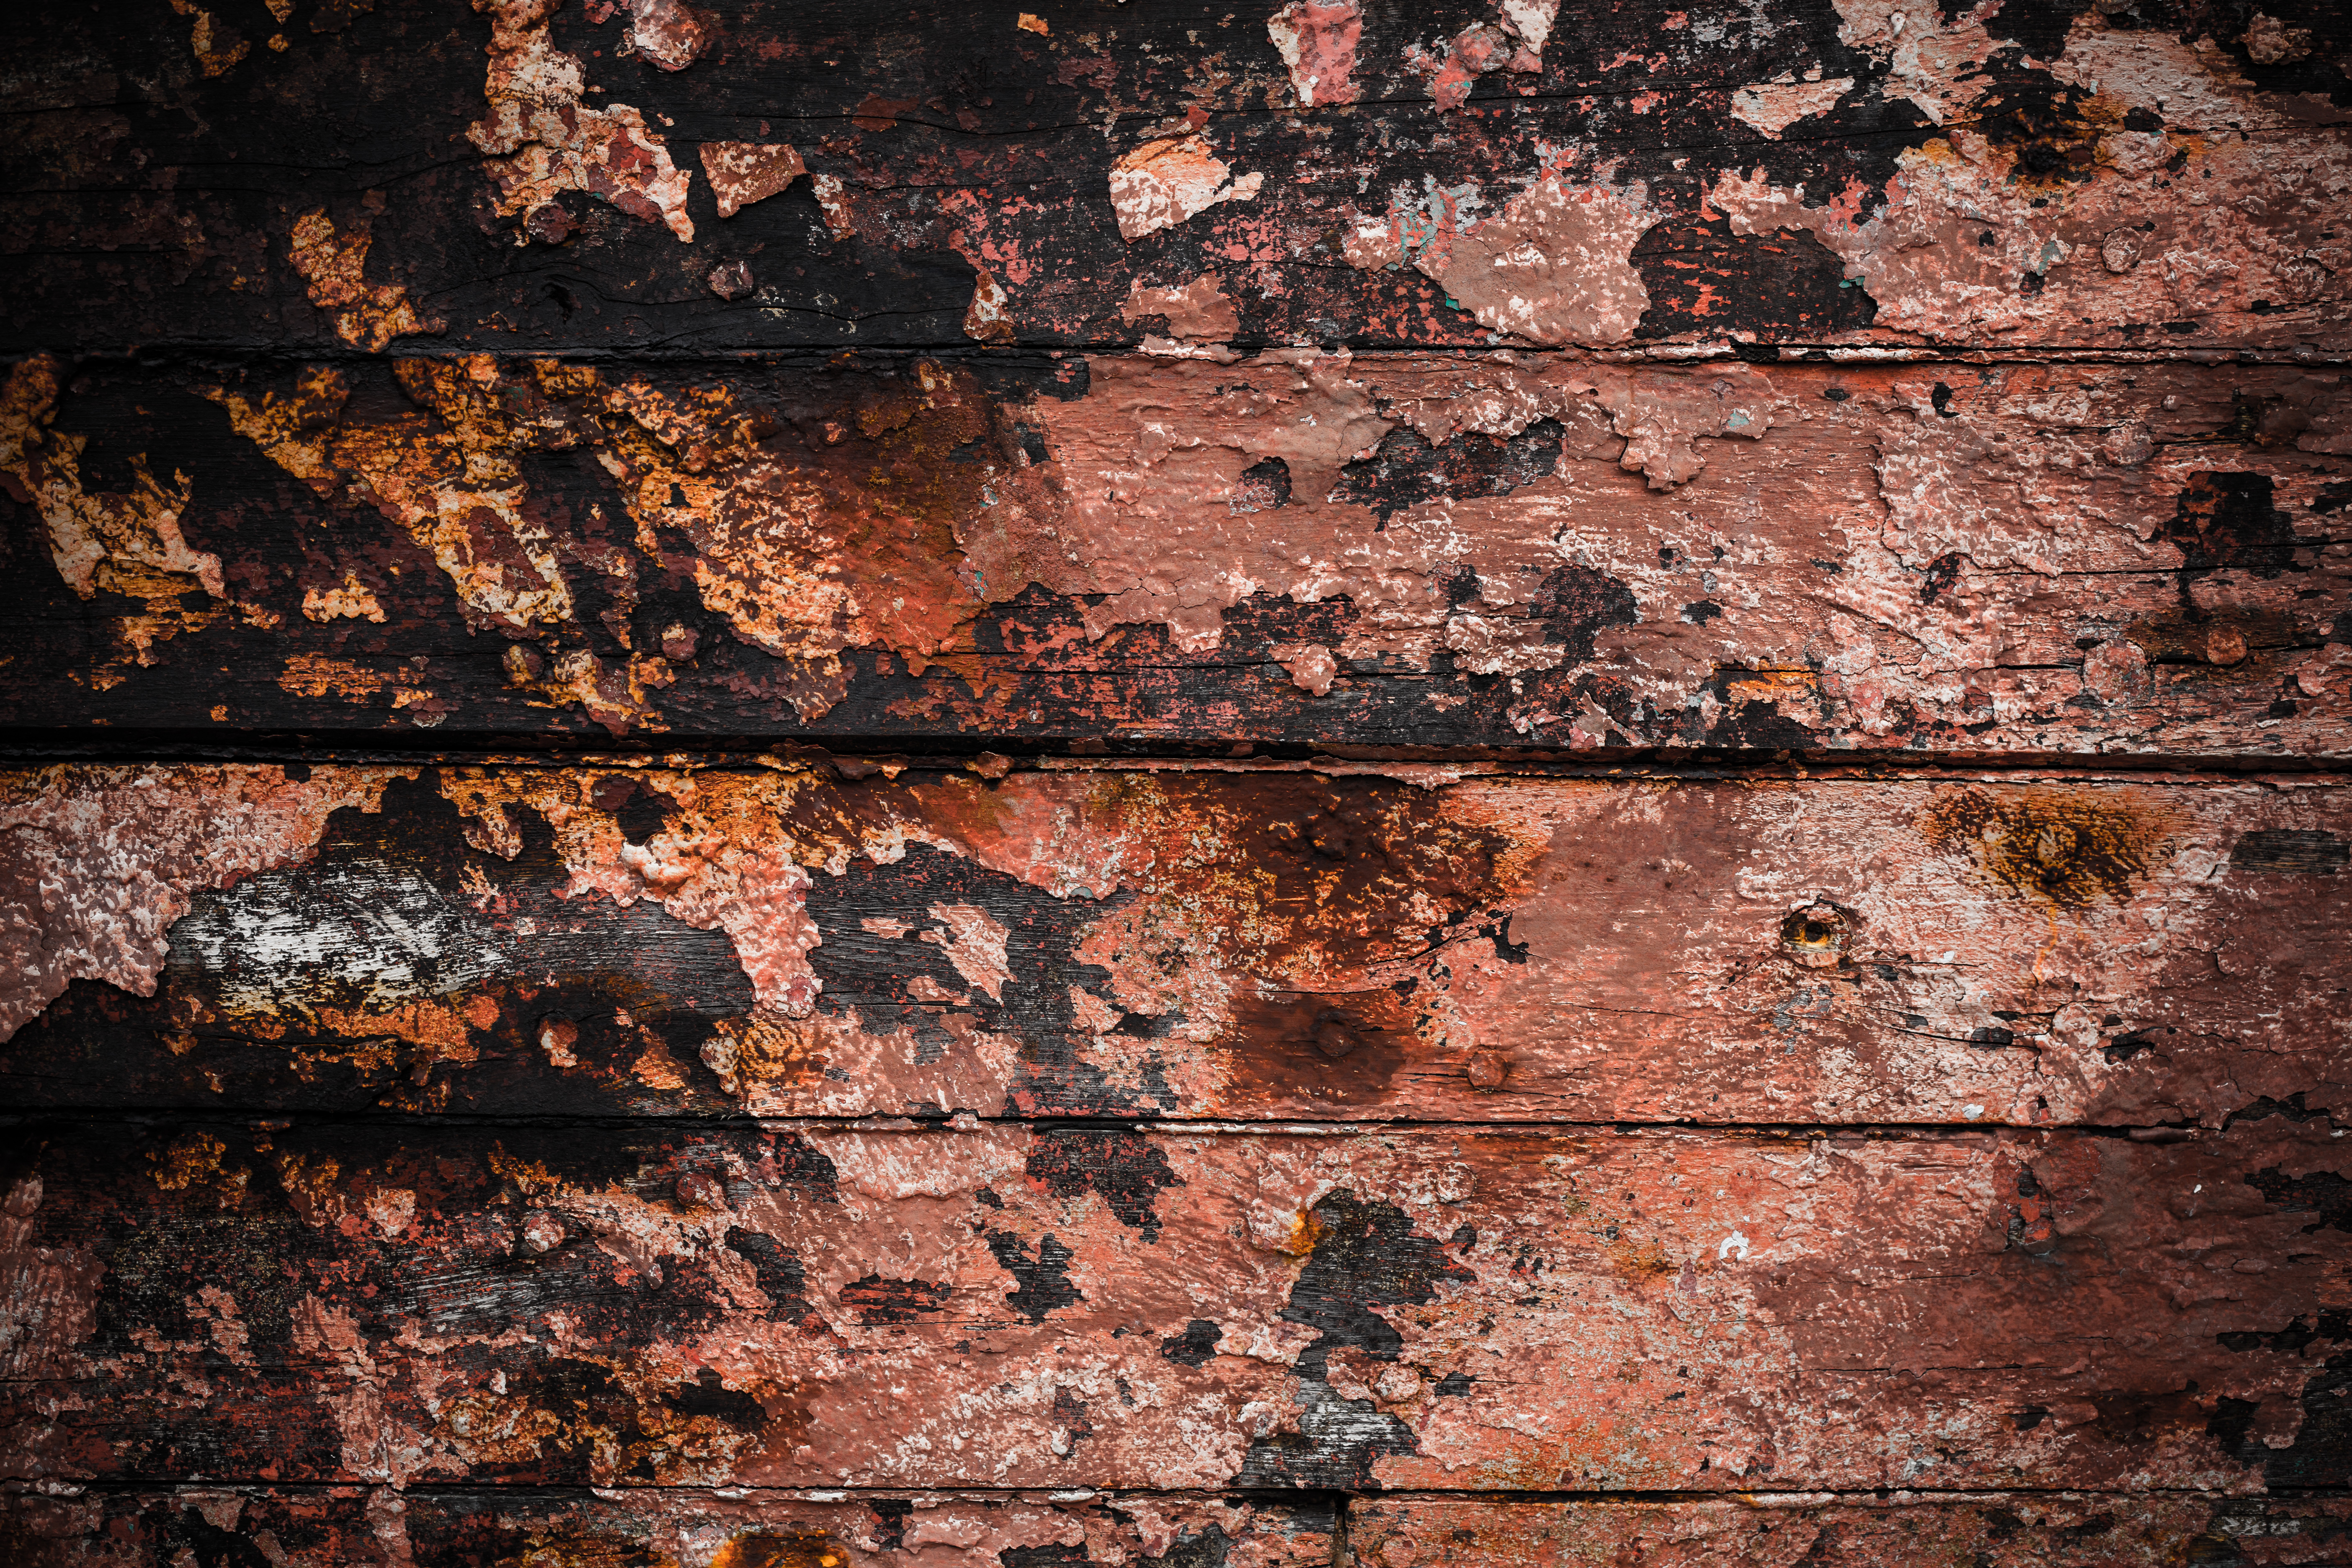 Gritty Painted Surface, Damaged, Dark, Dirt, Gritty, HQ Photo